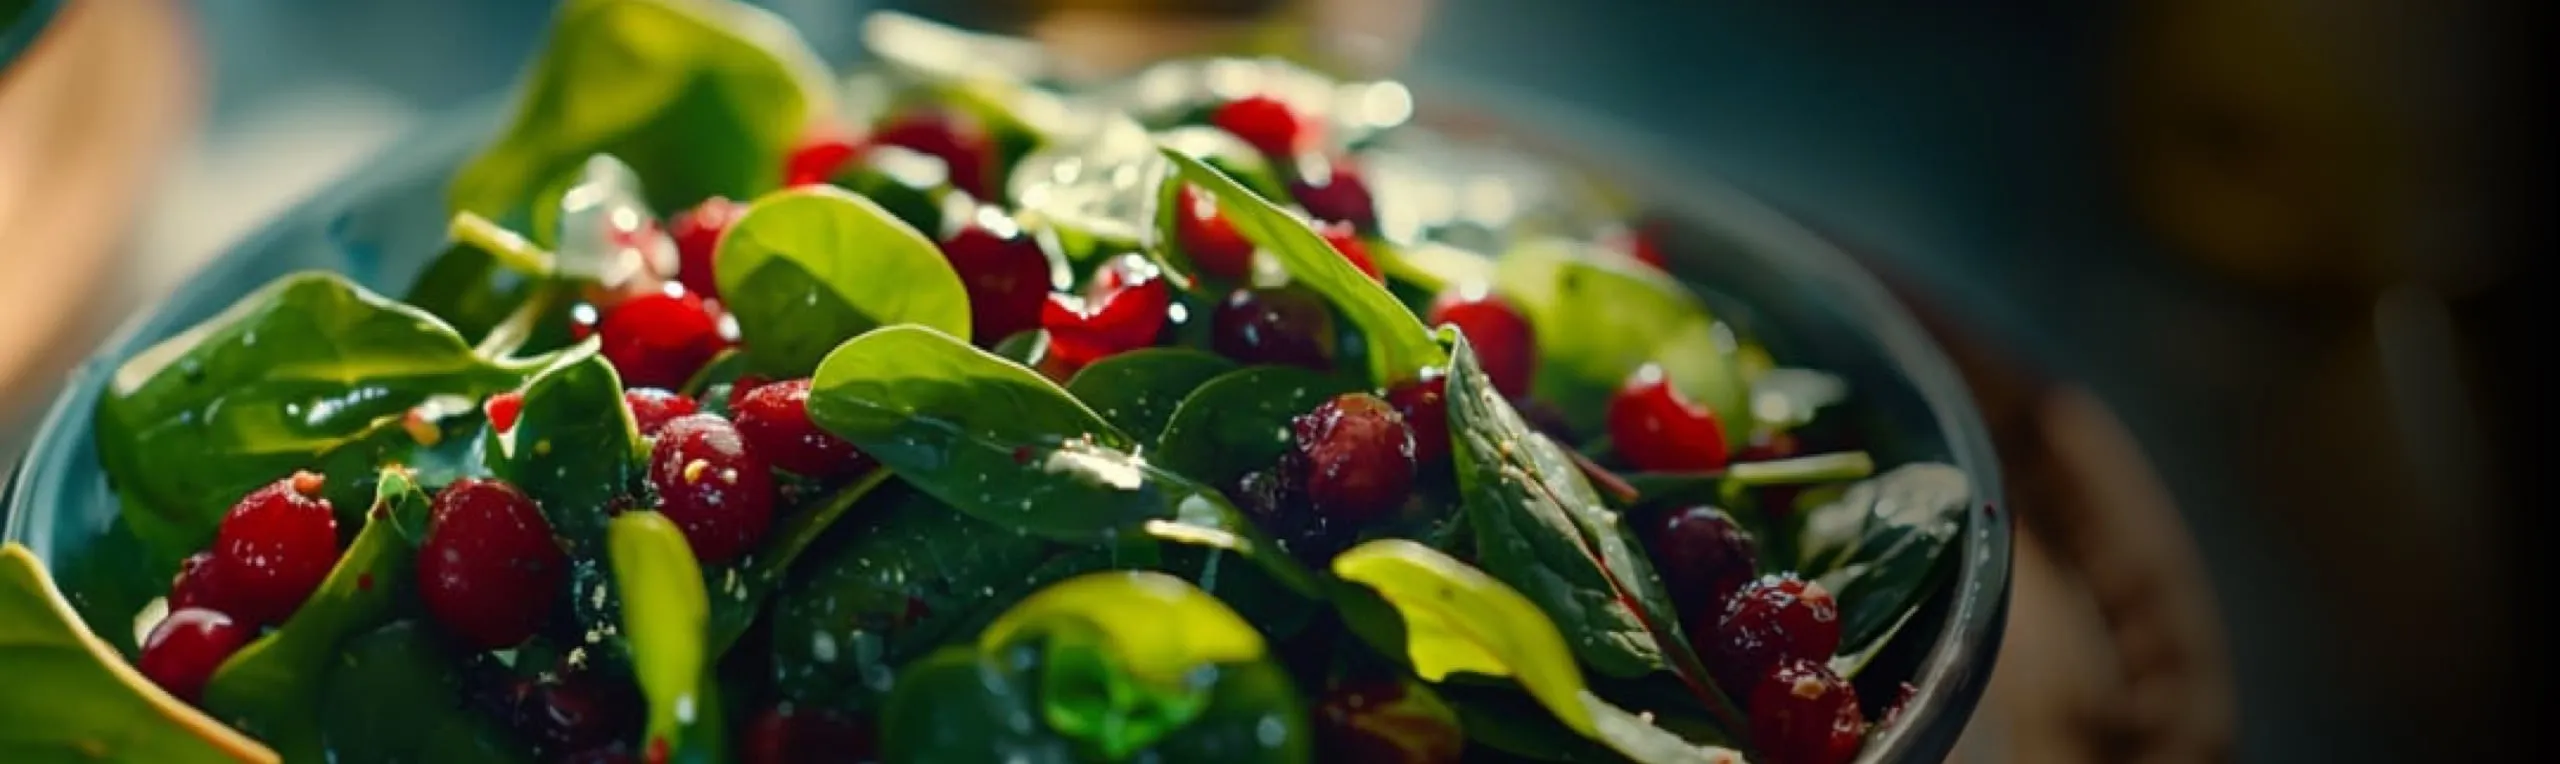 Featured   Cranberry Spinach Salad Article   Desktop